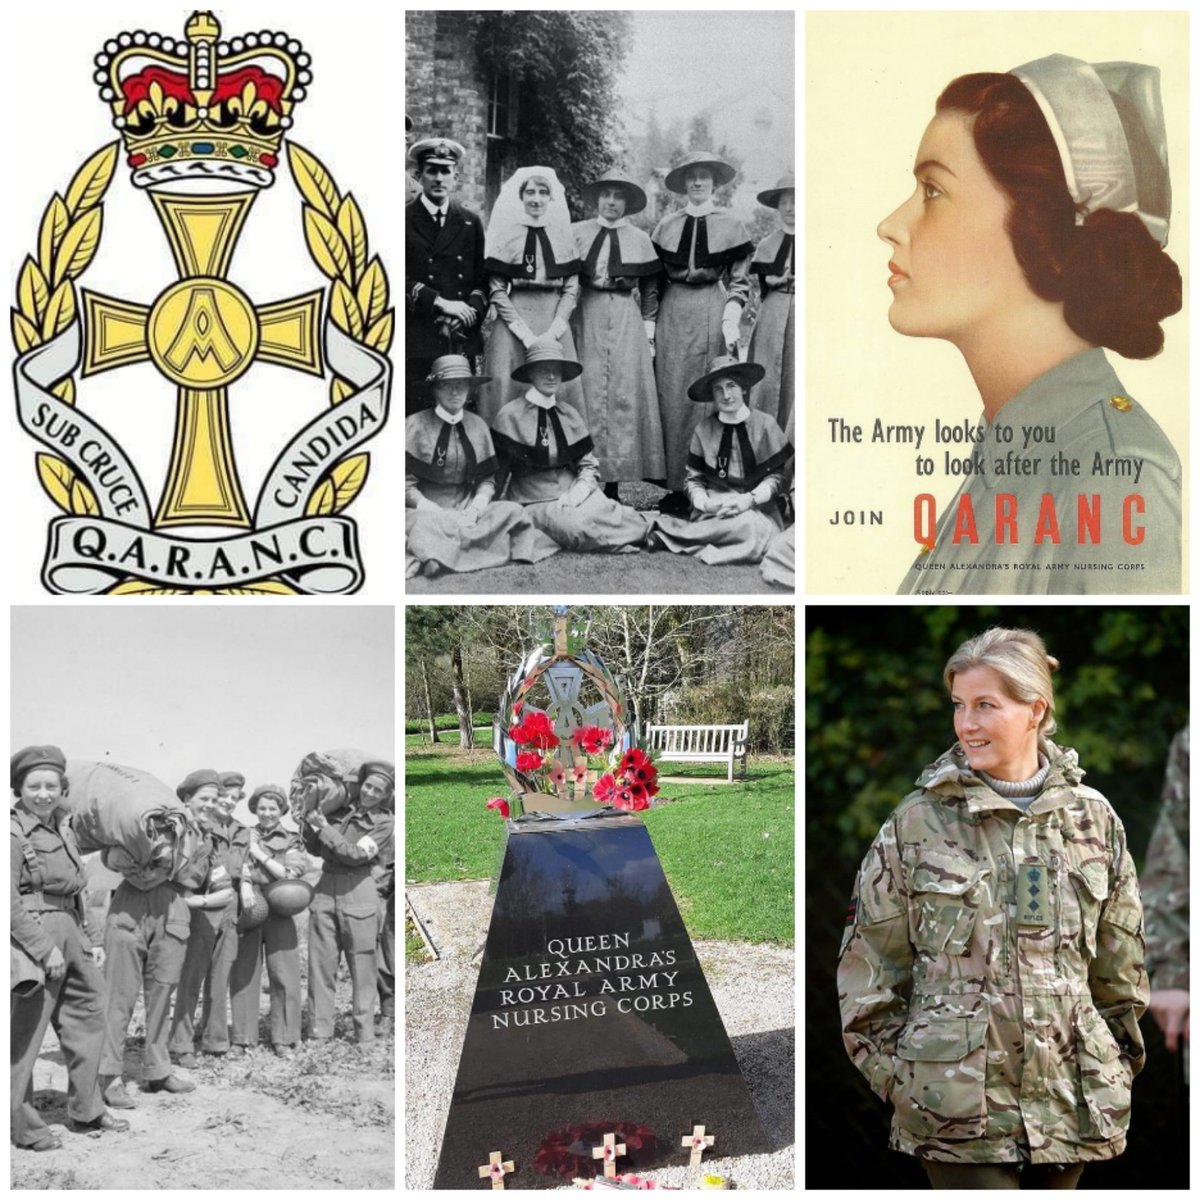 Today is #QARANC Corps Day, celebrating the formation of #QAIMNS 27th March 1902 under Royal Warrant. In 1949 it become #QARANC & 2024 marks the 75th year. Thank you to everyone that has served & continues to do so, you do an amazing job! #BritishArmy #ArmyNurse #womenshistory